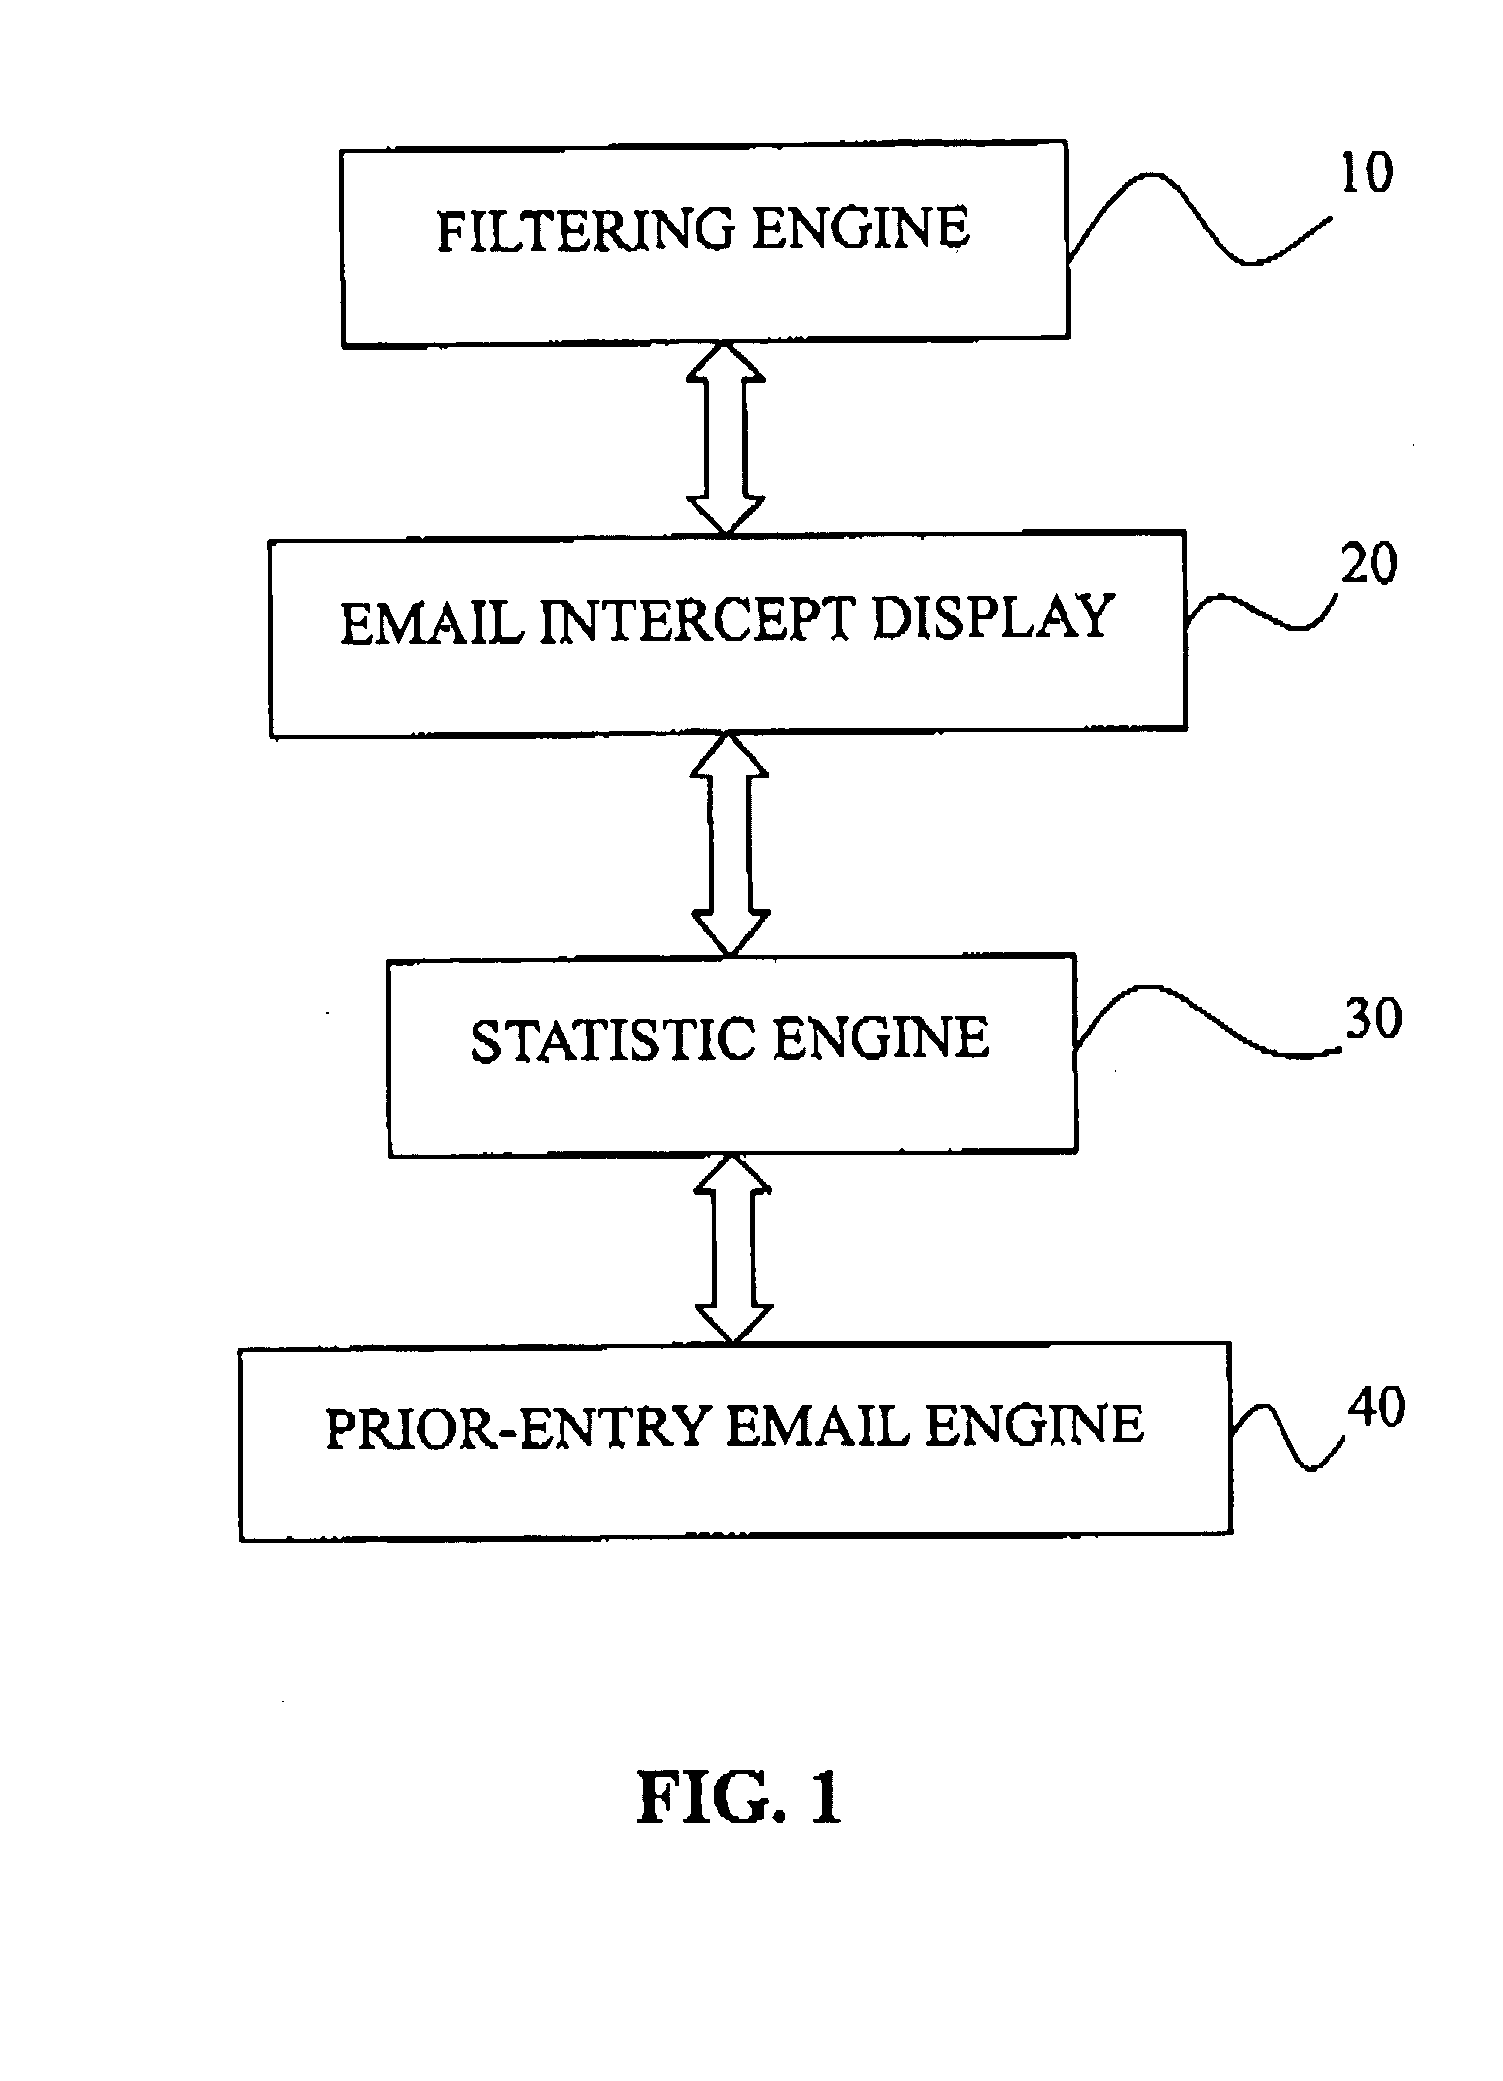 Filtering device for eliminating unsolicited email